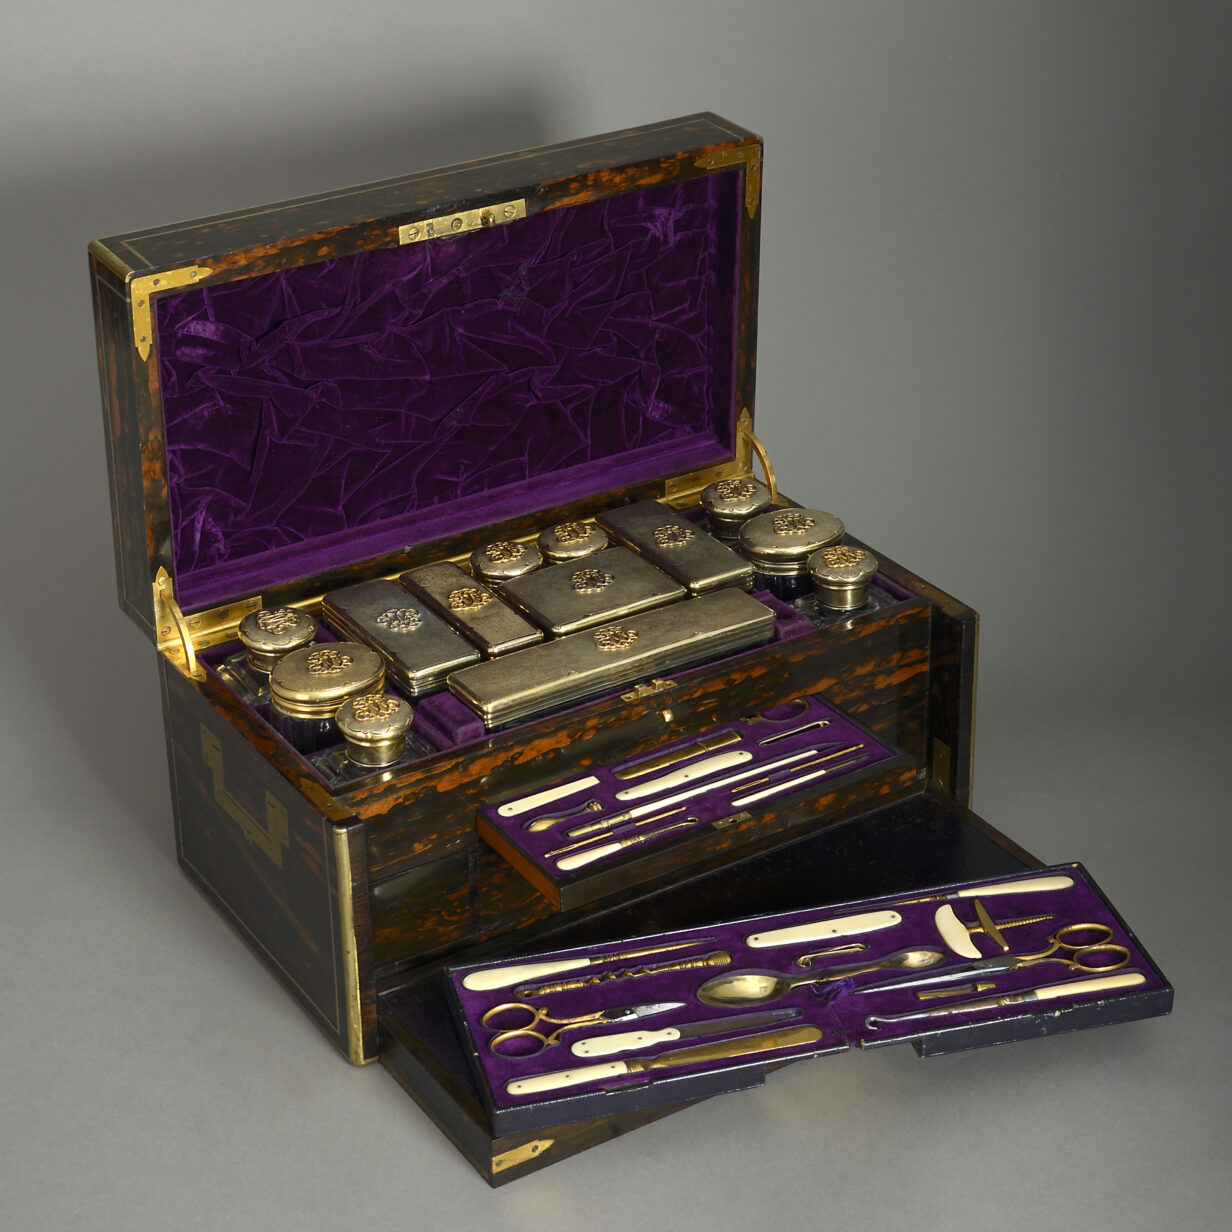 Exceptional 19th century lady's travelling dressing case by leuchars of london